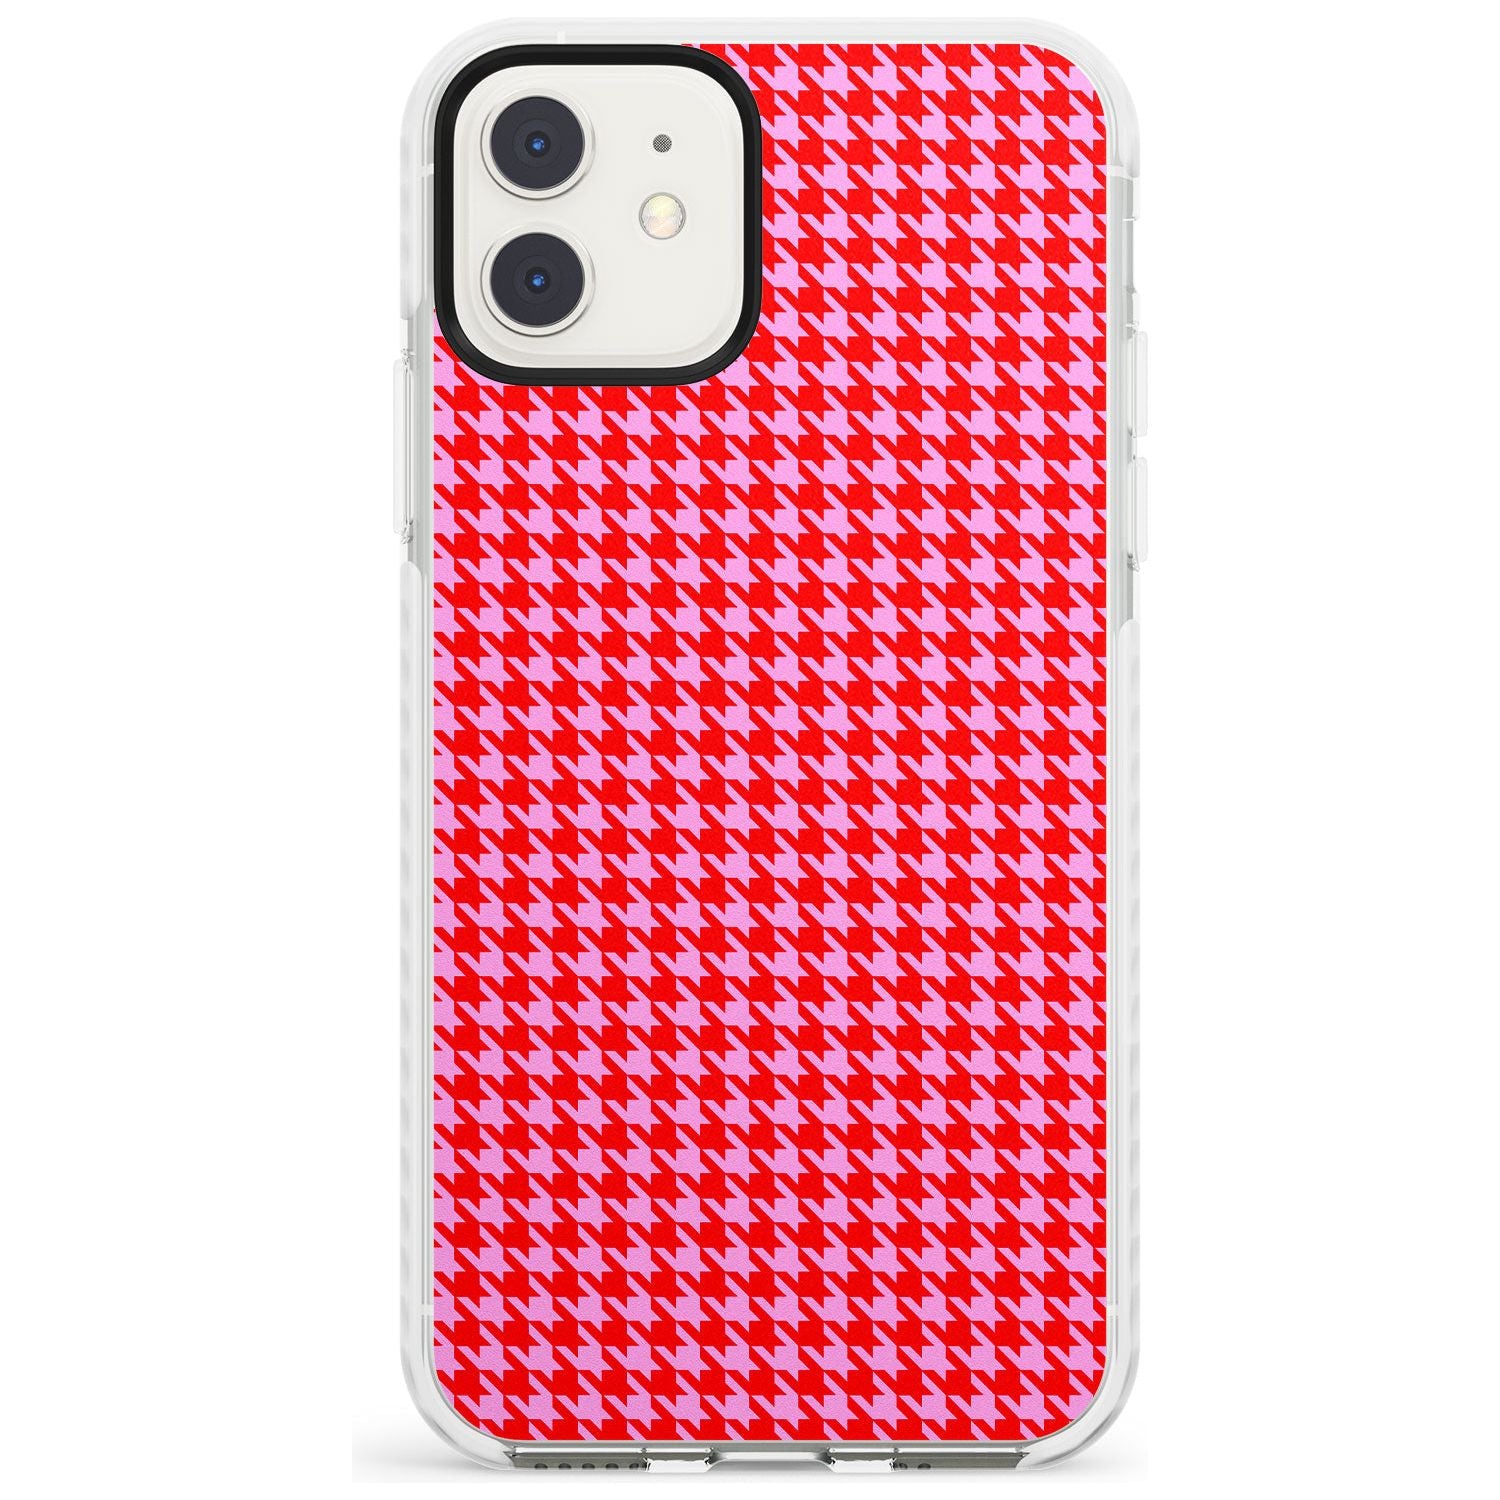 Neon Pink & Red Houndstooth Pattern Impact Phone Case for iPhone 11